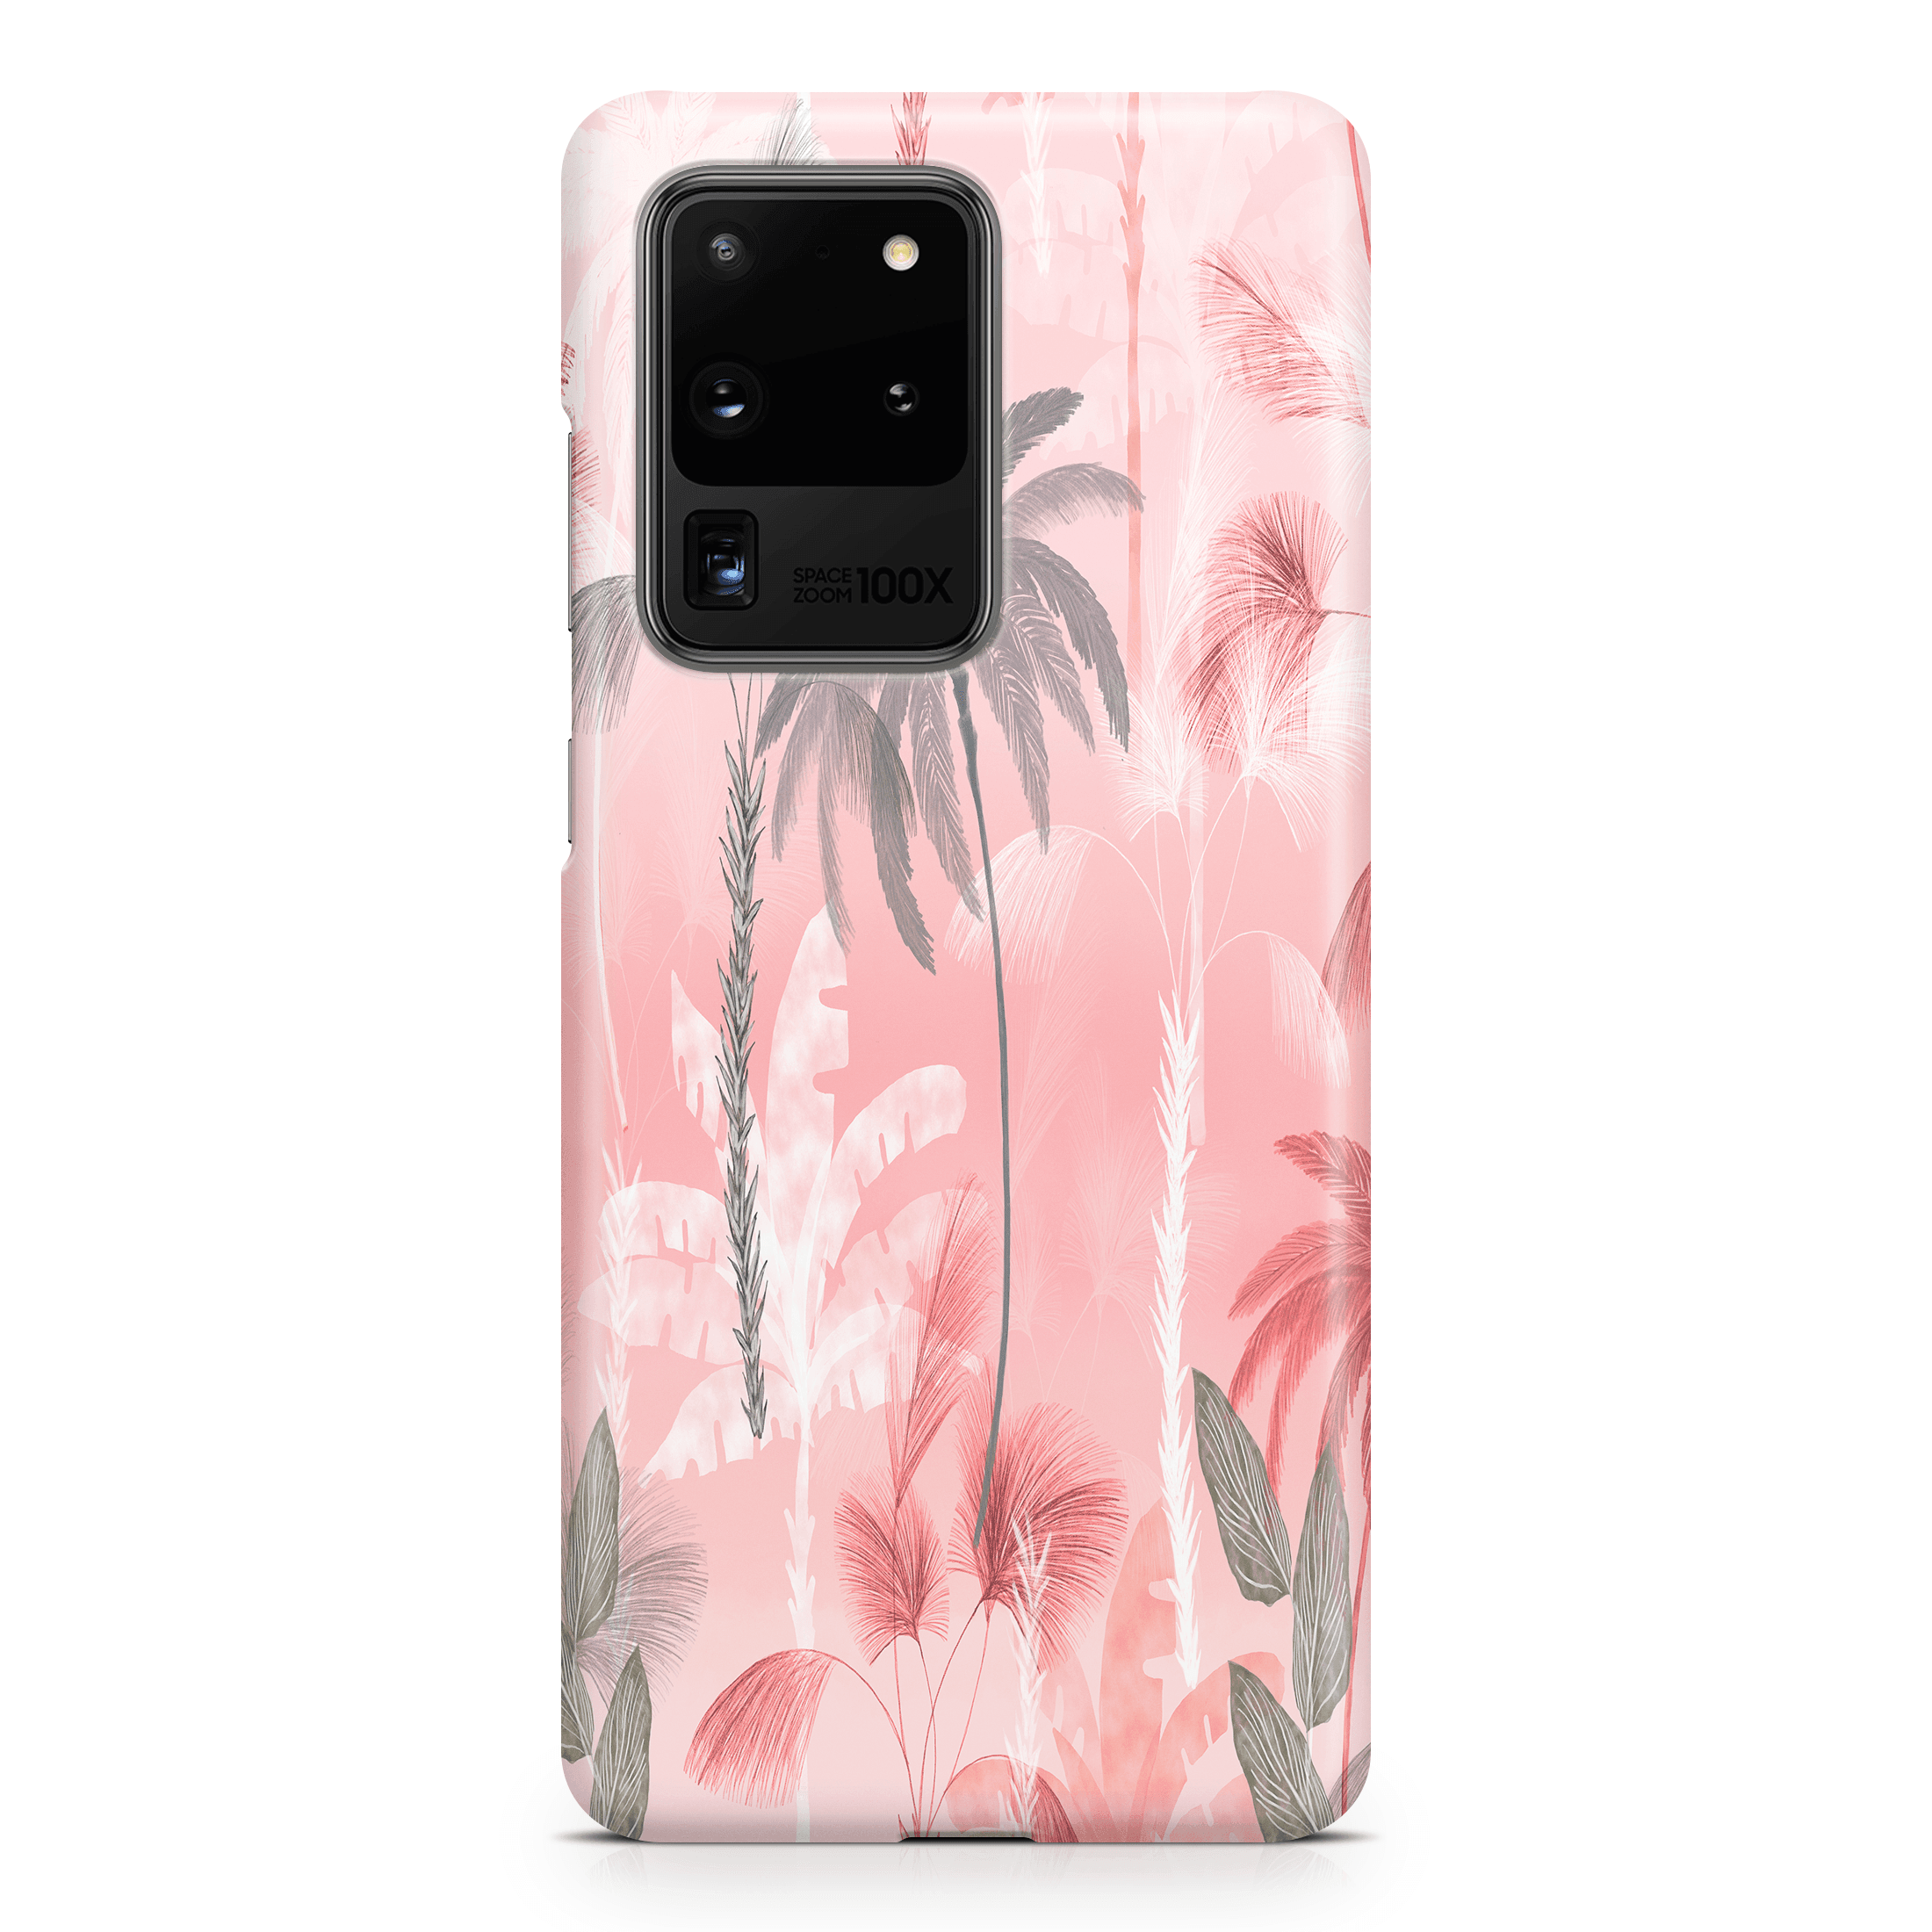 Smoothie Tropical - Samsung phone case designs by CaseSwagger